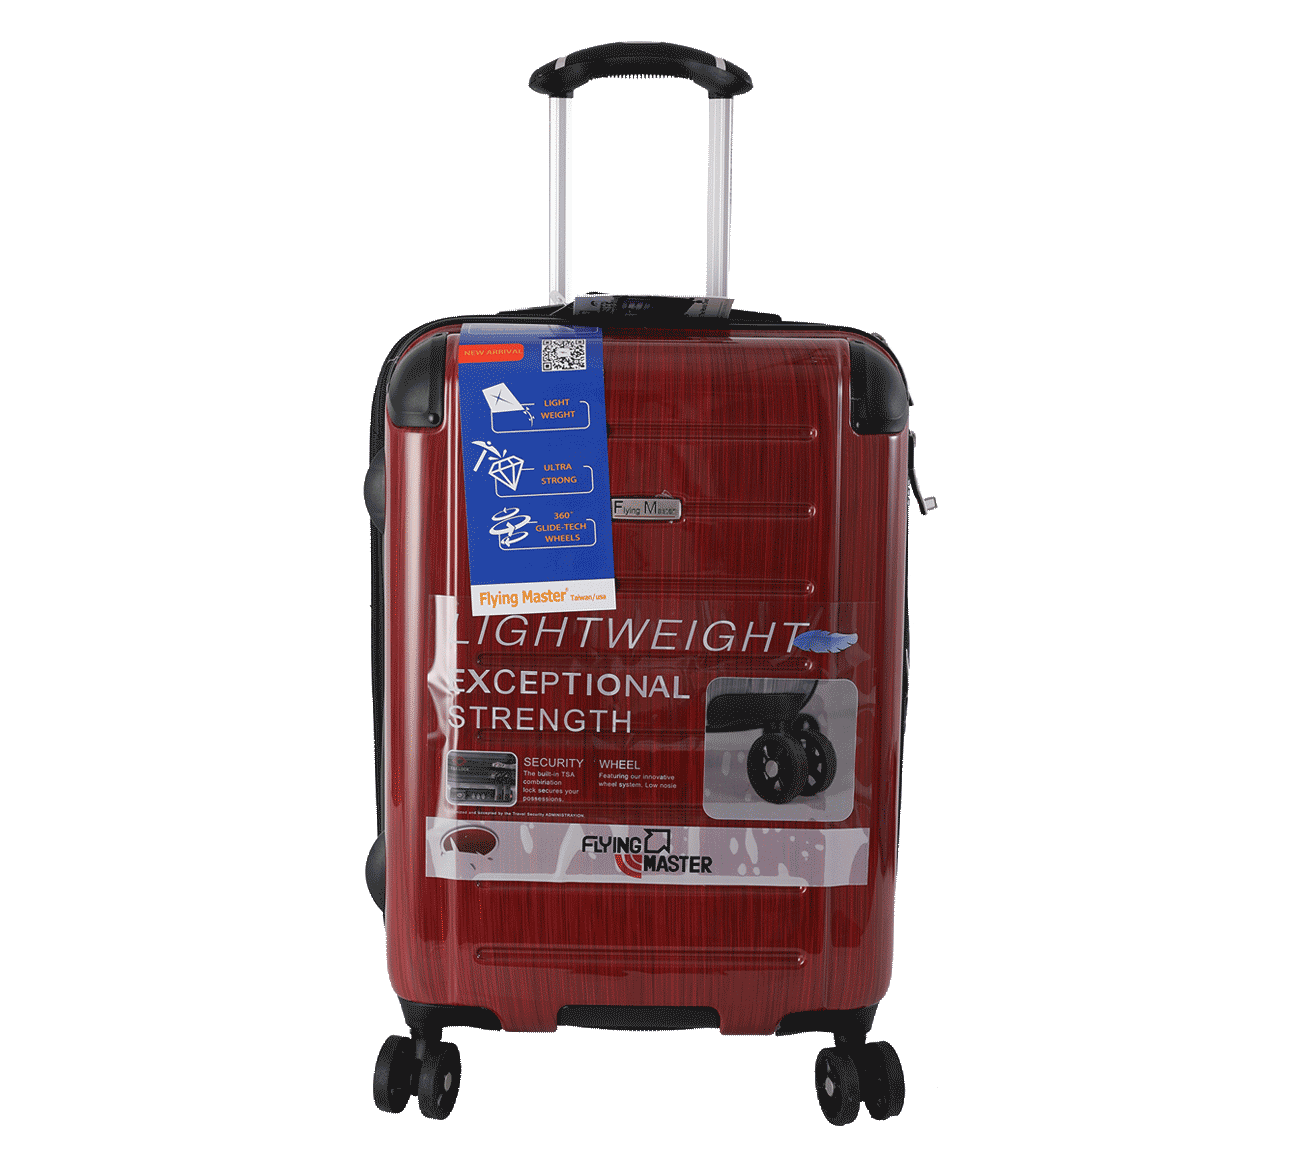  New luggage with universal spinners